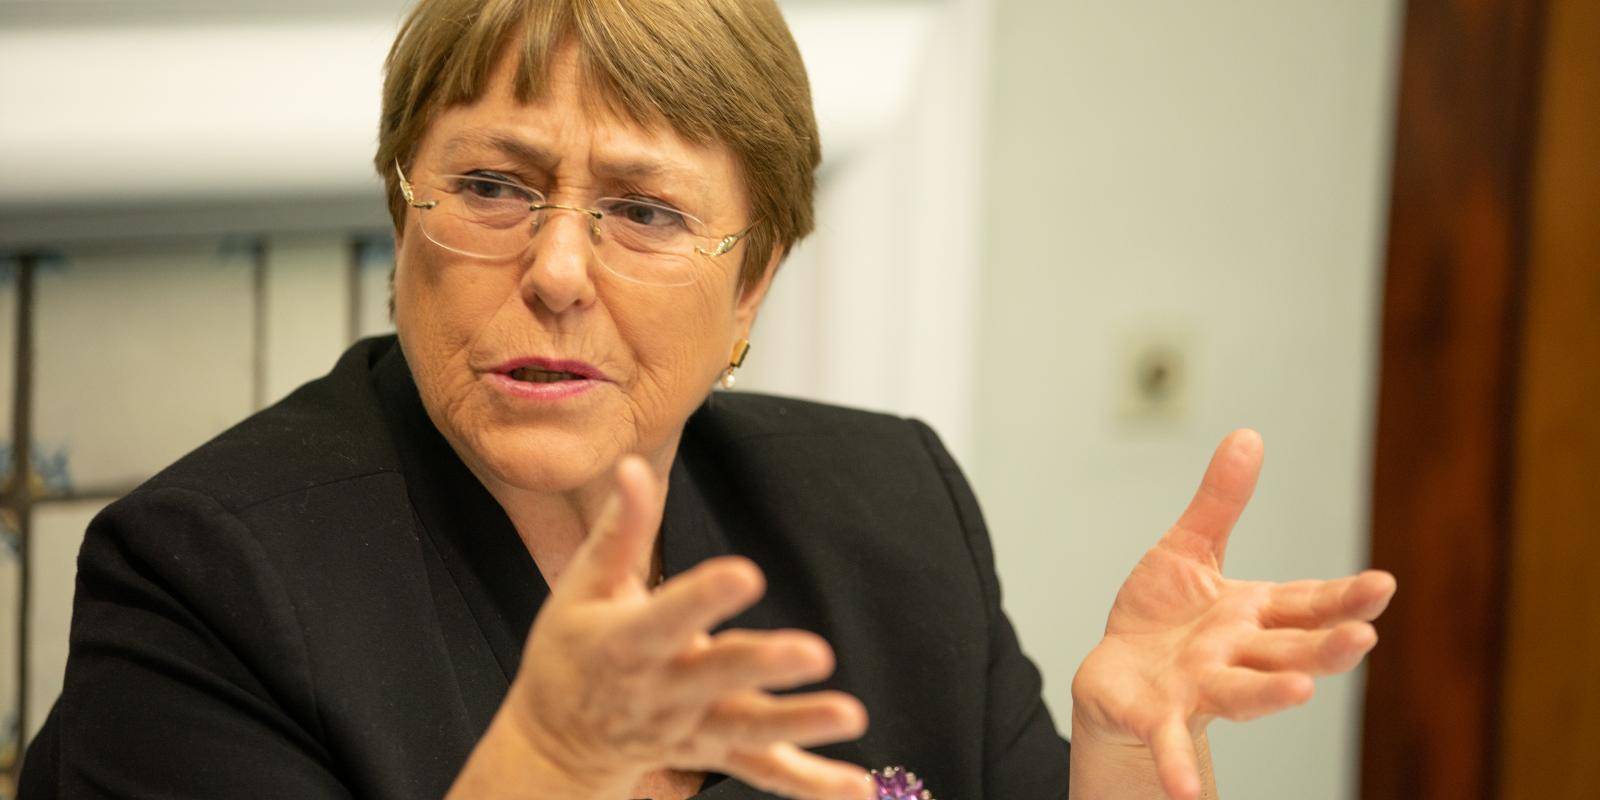 Michelle Bachelet on Being a Woman in Politics | Chatham House